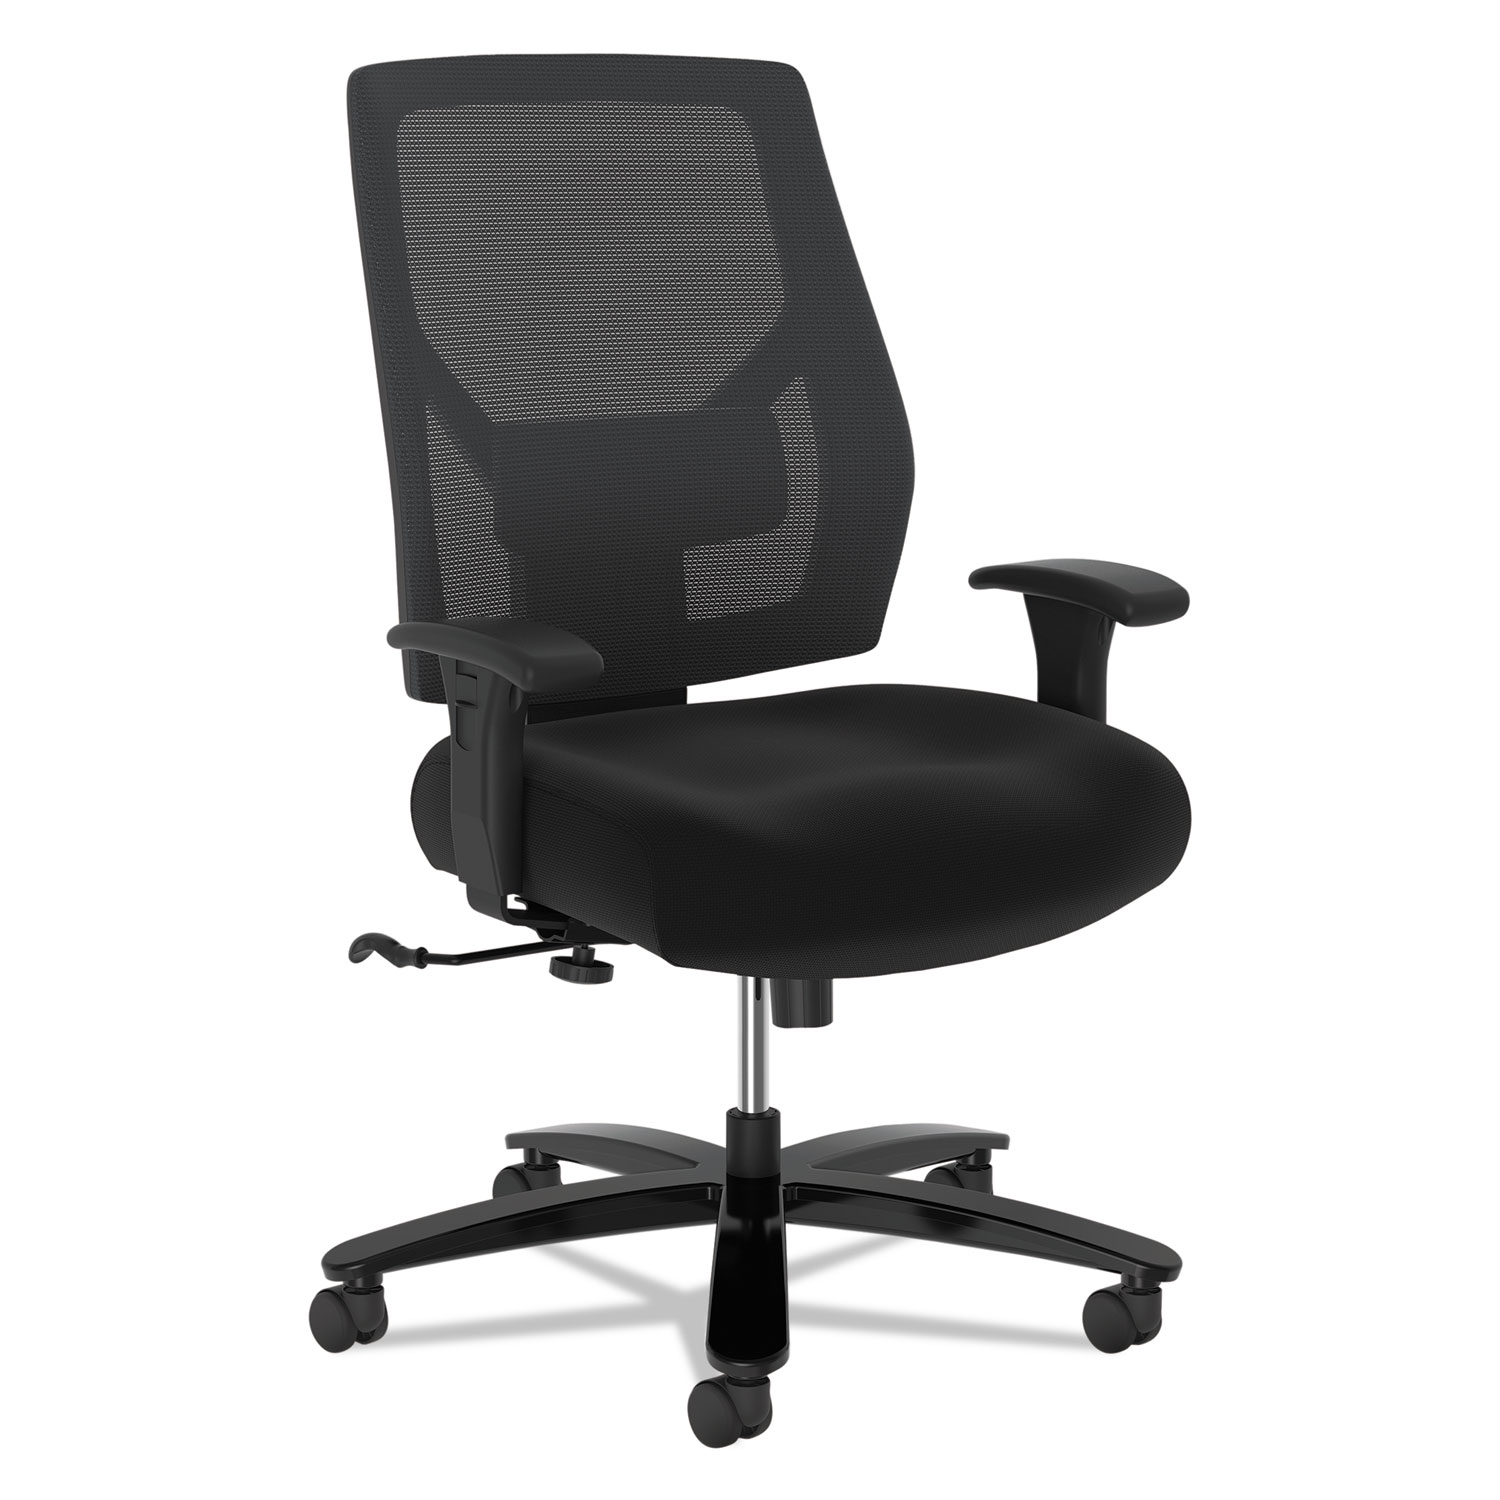  HON HVL585.ES10.T Crio Big and Tall Mid-Back Task Chair, Supports up to 450 lbs., Black Seat/Black Back, Black Base (BSXVL585ES10T) 